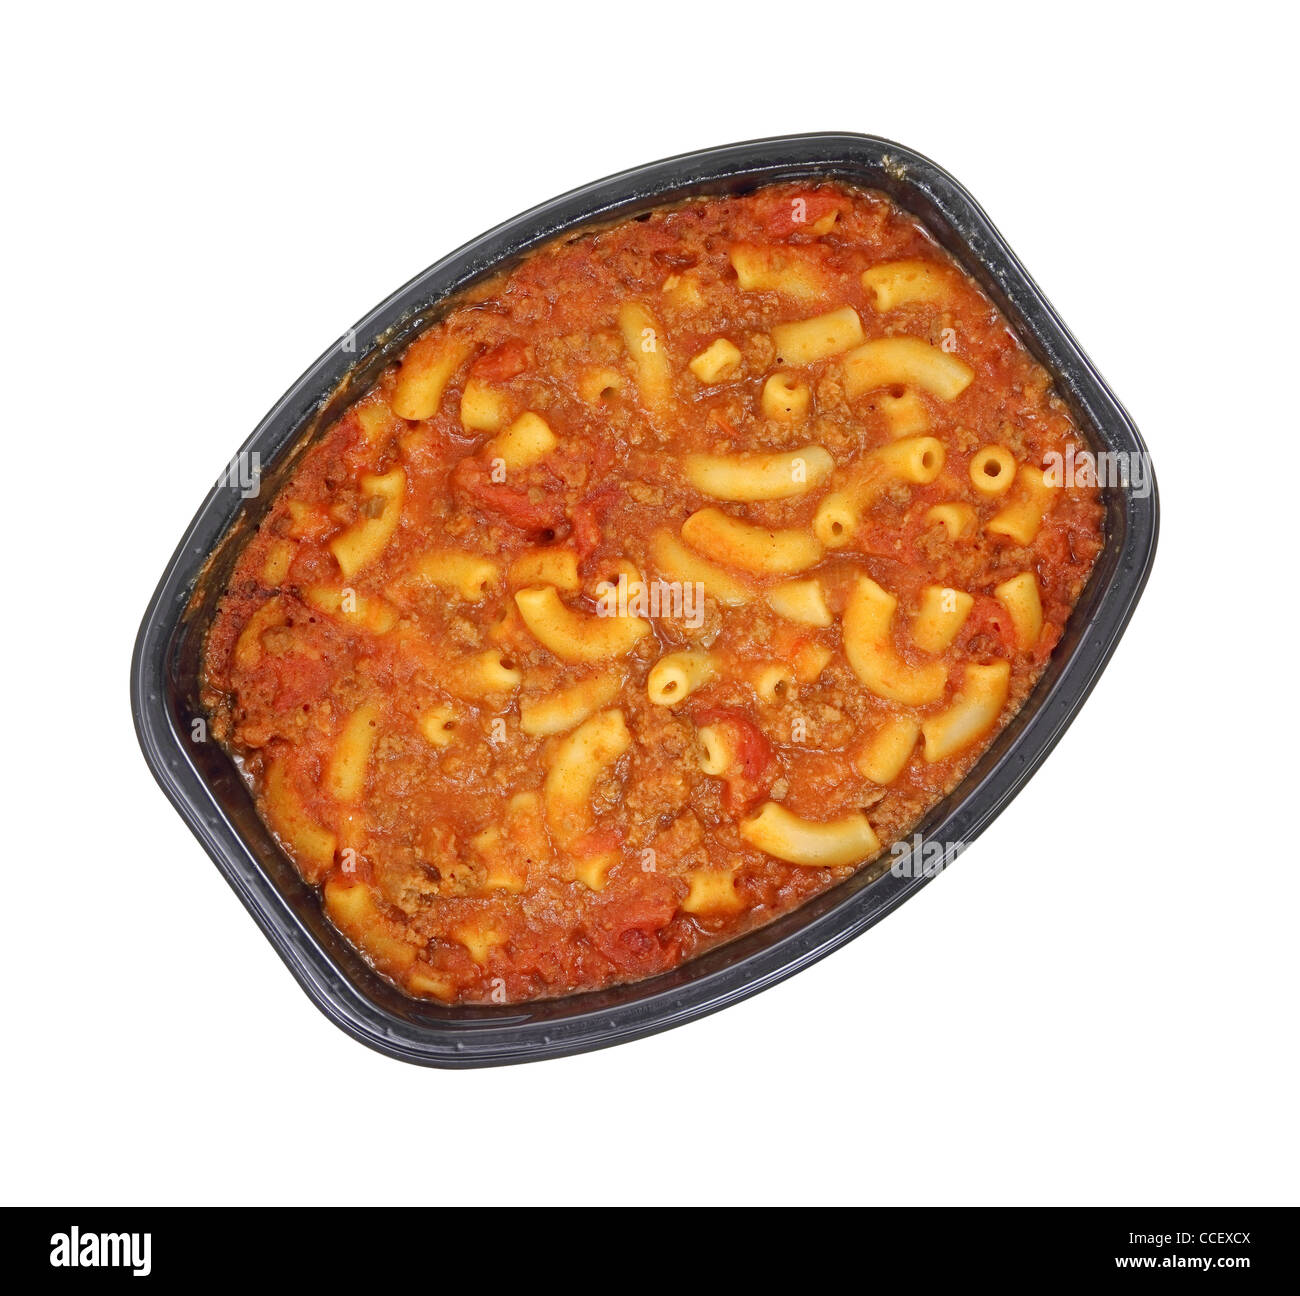 Macaroni and beef dinner in black tray Stock Photo